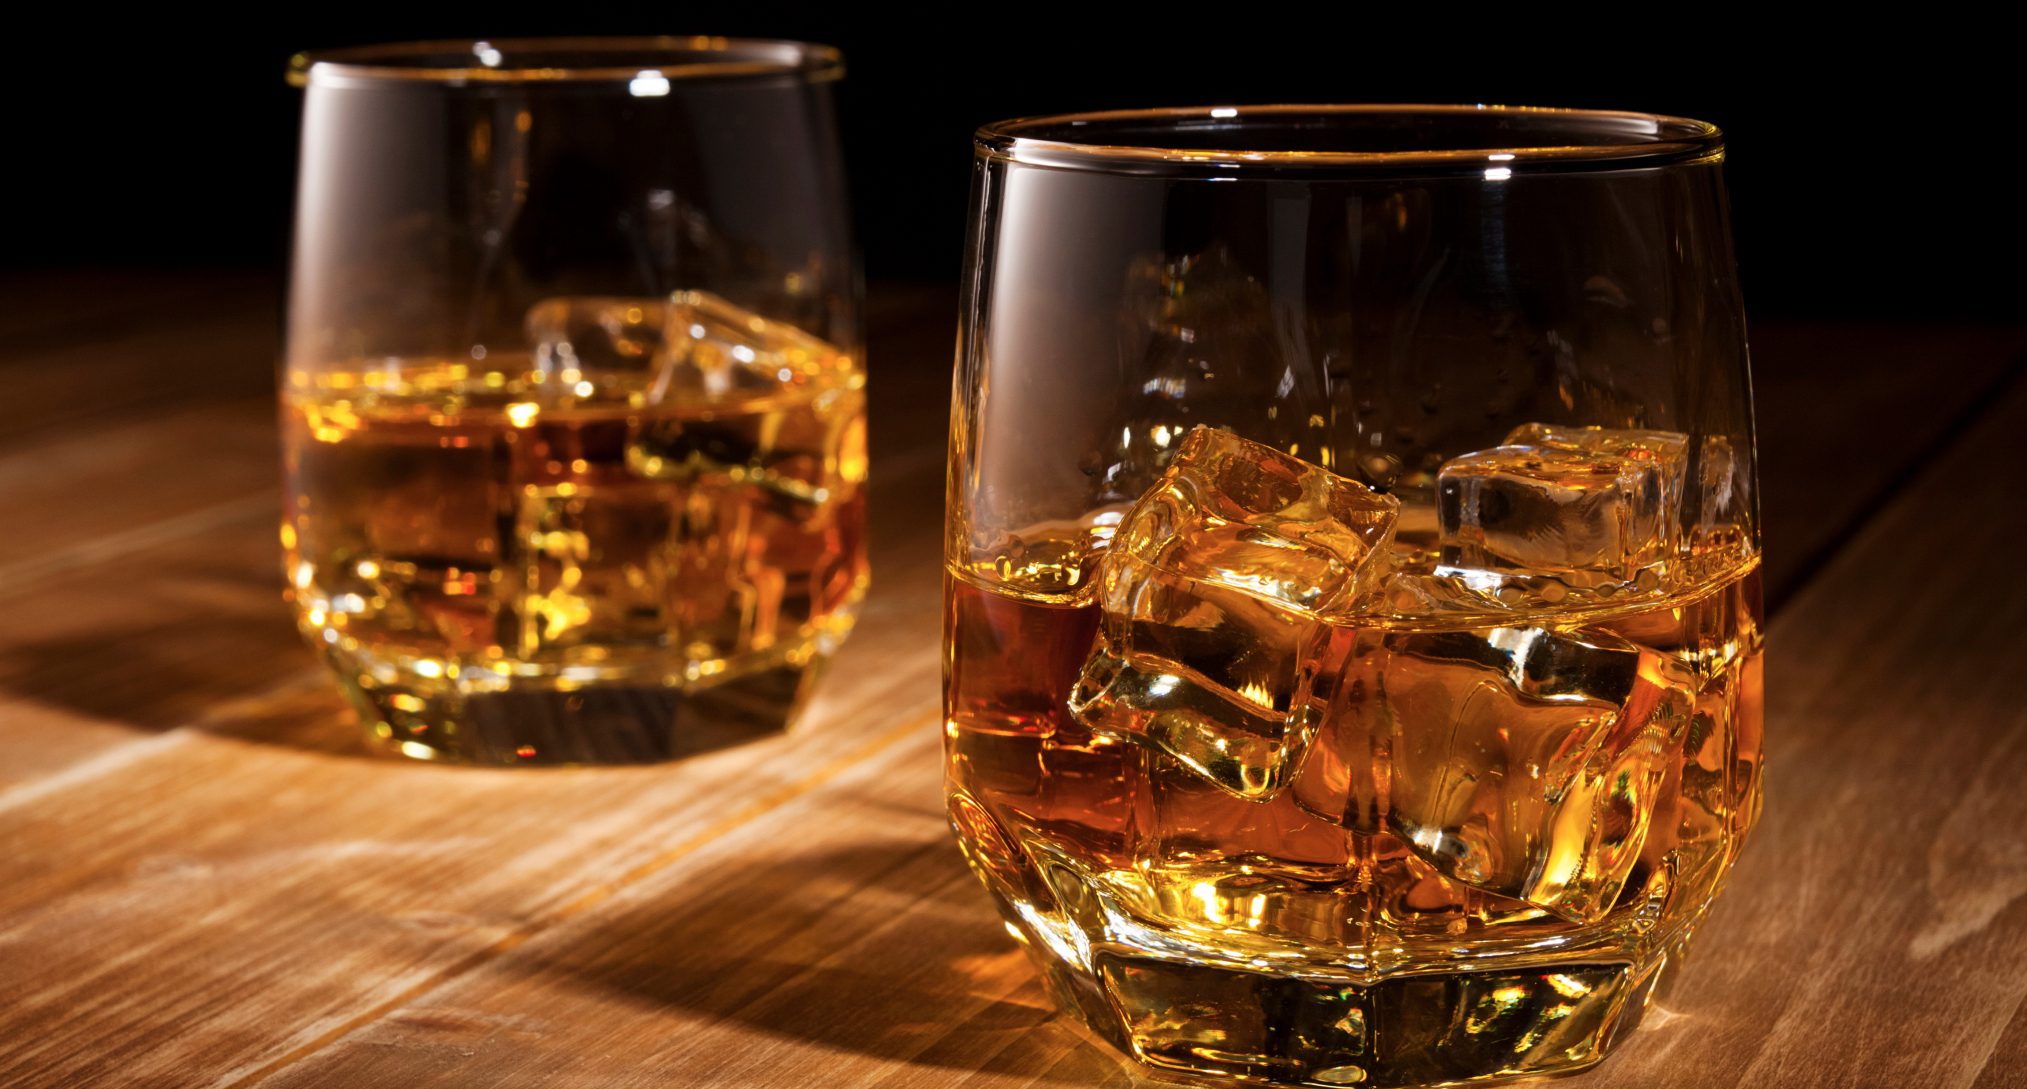 How to add ice to your whiskey, according to science